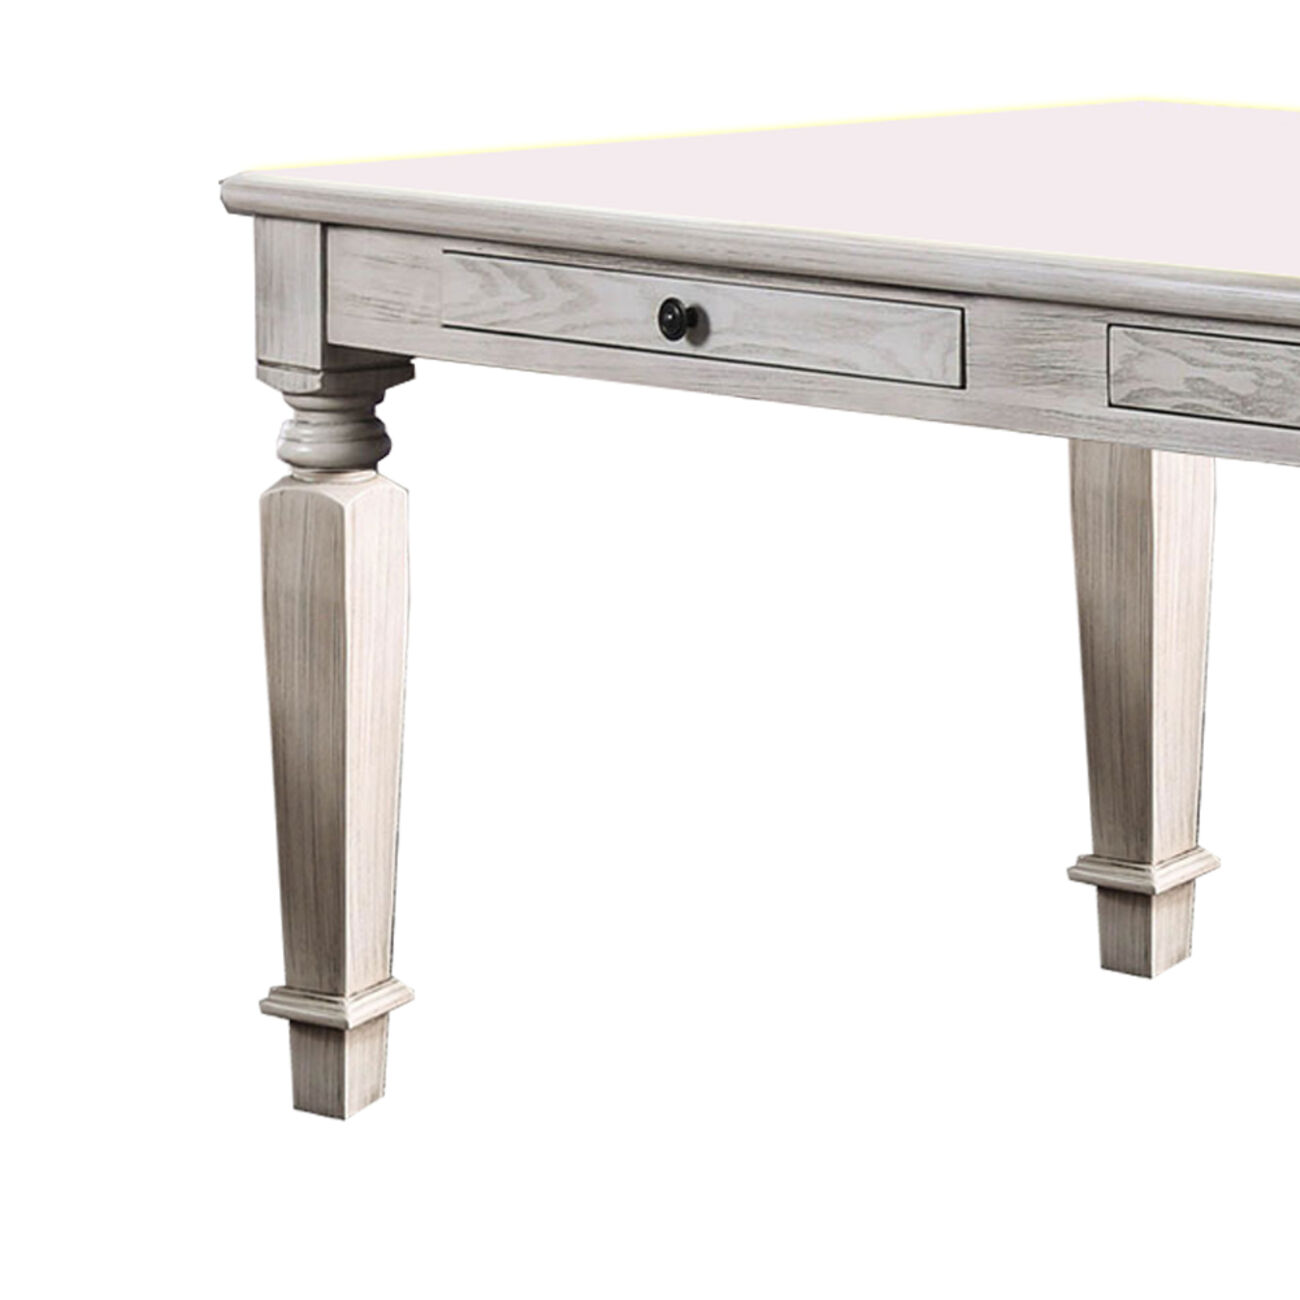 Wooden Dining Table with 2 Drawers and Tapered Legs, Distressed White